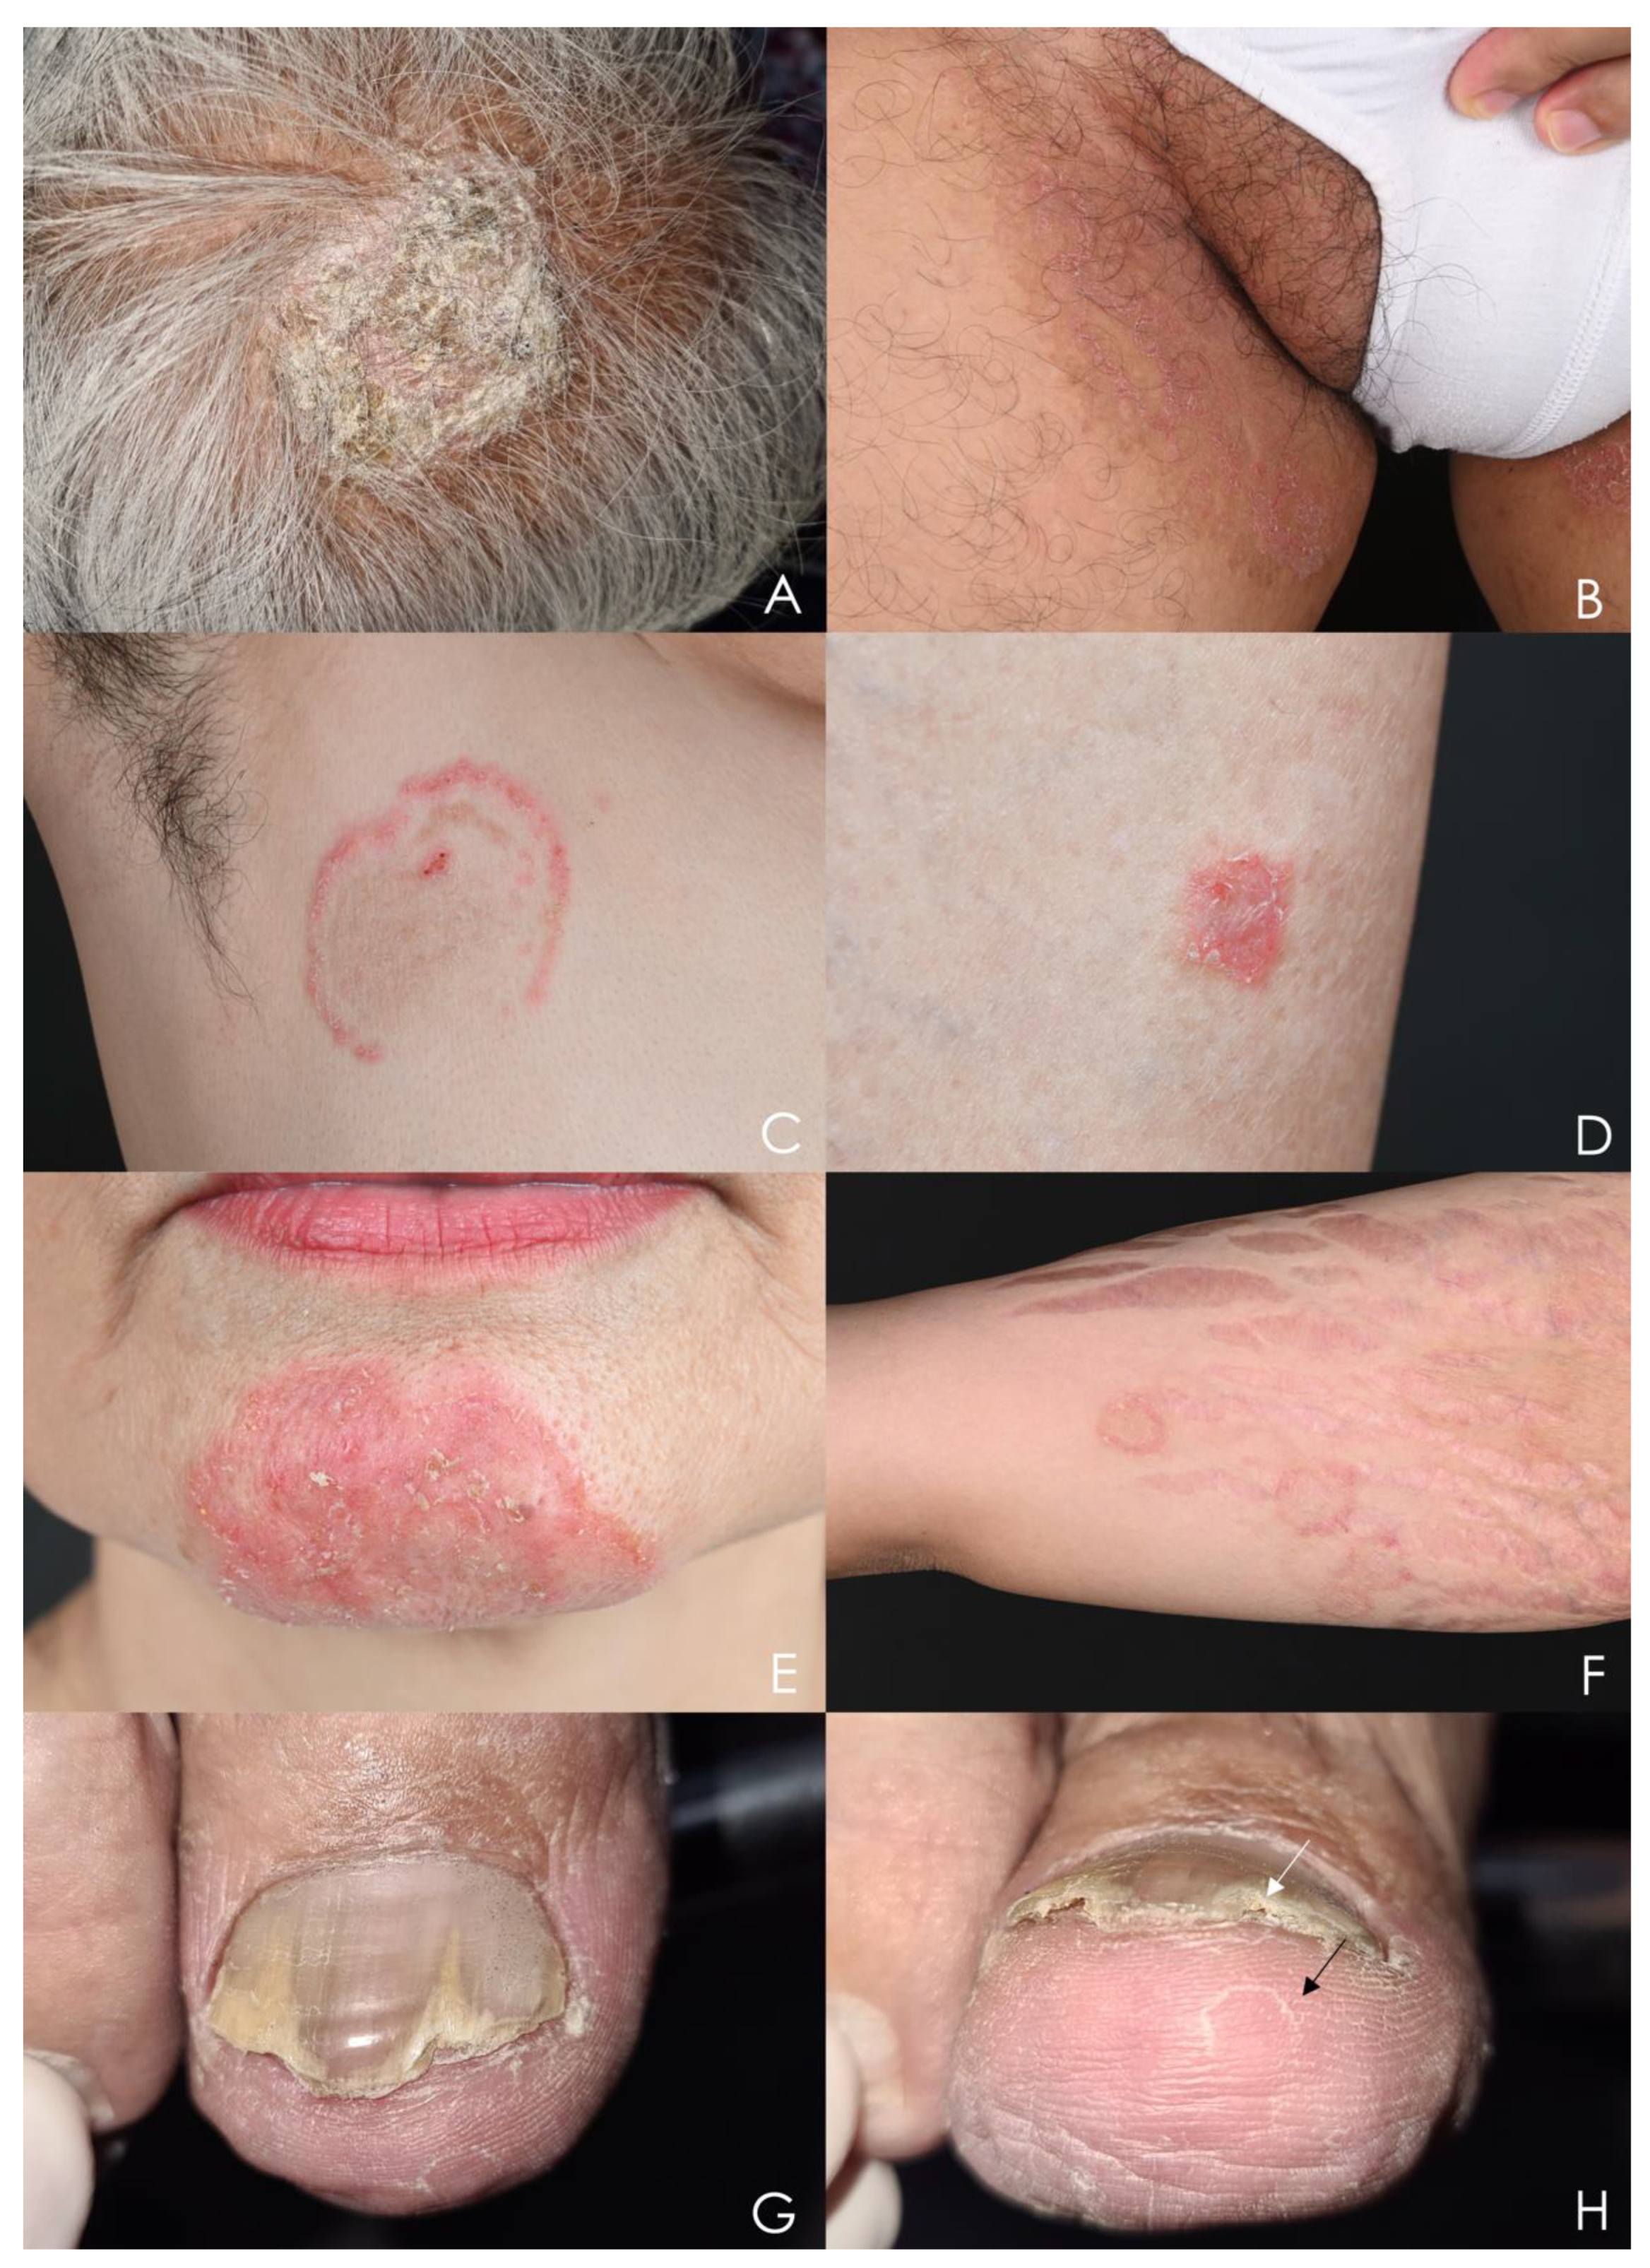 Successful Treatment of Fungal Groin Infection and Tinea Cruris